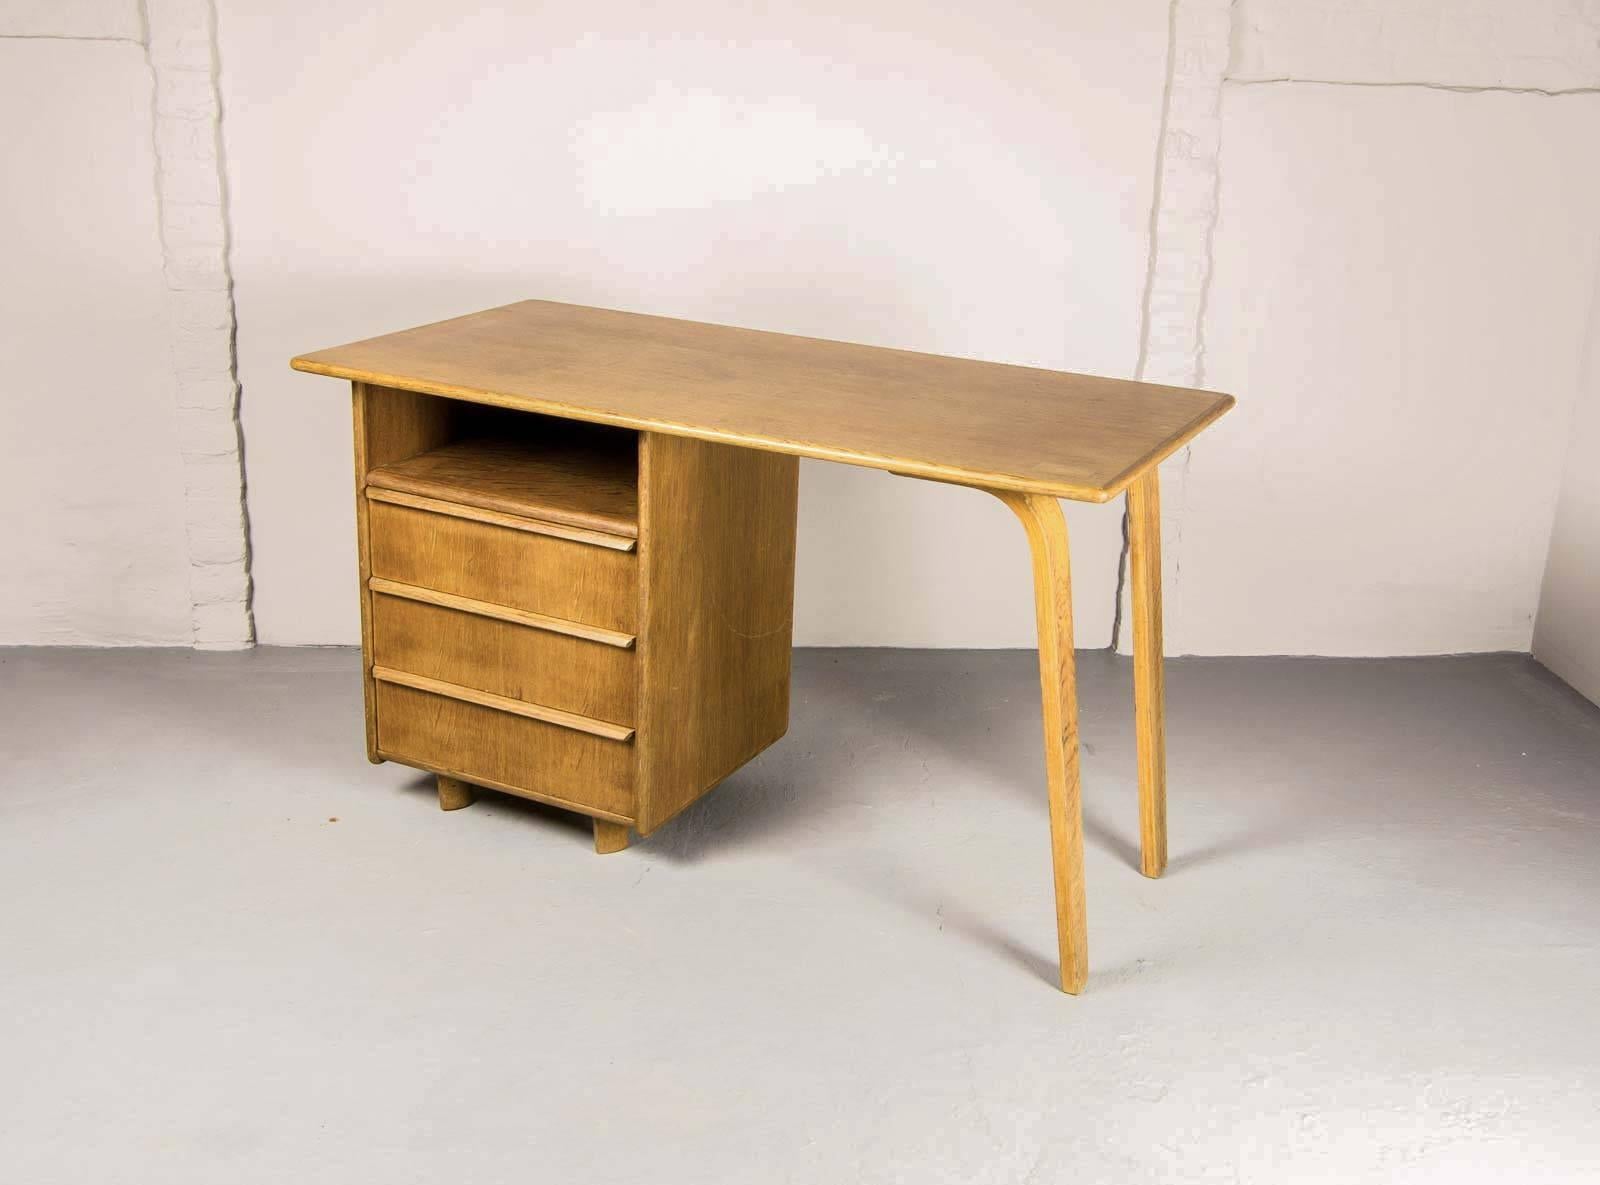 This Dutch design 'EE02' desk from the oak series was designed by Cees Braakman in 1948 and produced by Pastoe, The Netherlands. It is made from oak and has plywood legs. It contains three anti-dust drawers and a shelf on the left. The working